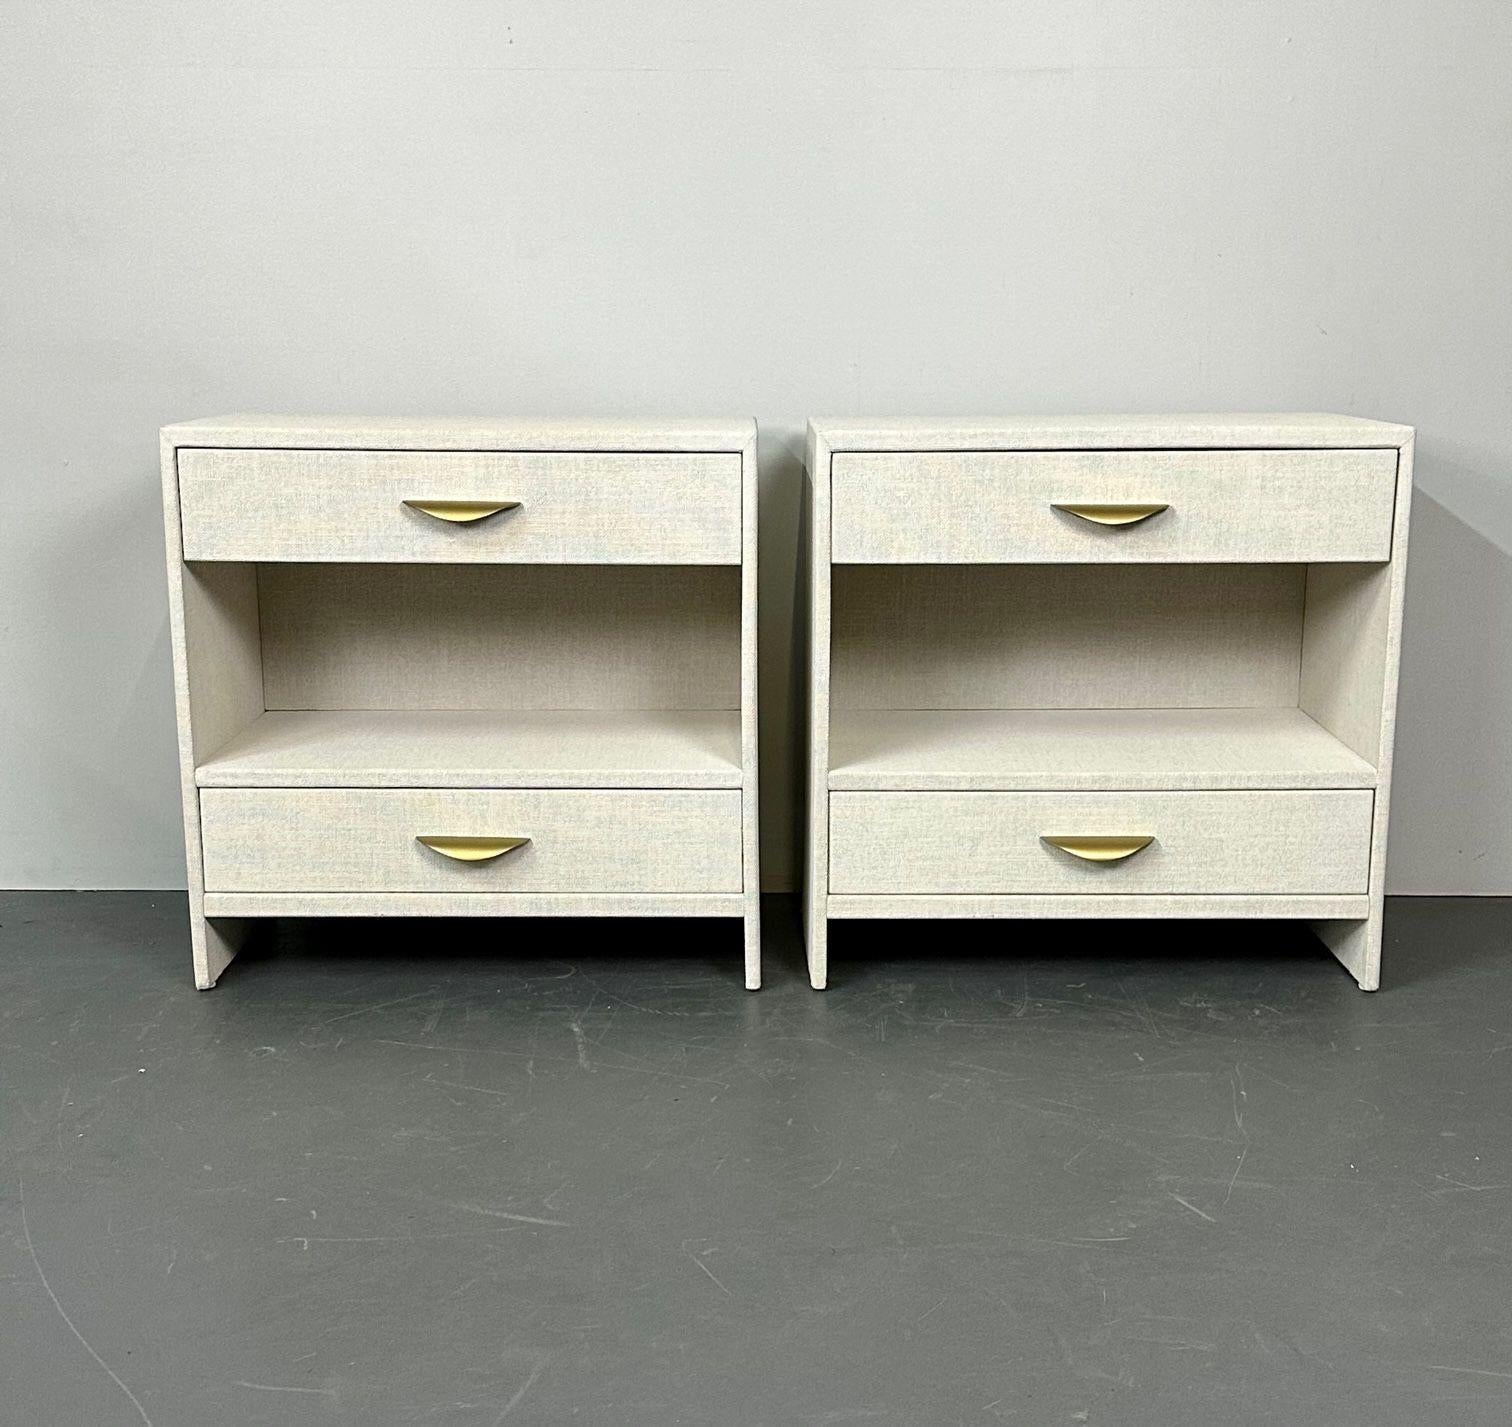 Pair Custom Linen Wrapped Open Commodes, Chests, Nightstands, White, American

Contemporary decorative cabinet hand wrapped in linen and given a multi-layered paint glaze in a neutral oyster color.

H 29.5
W 30
D 18